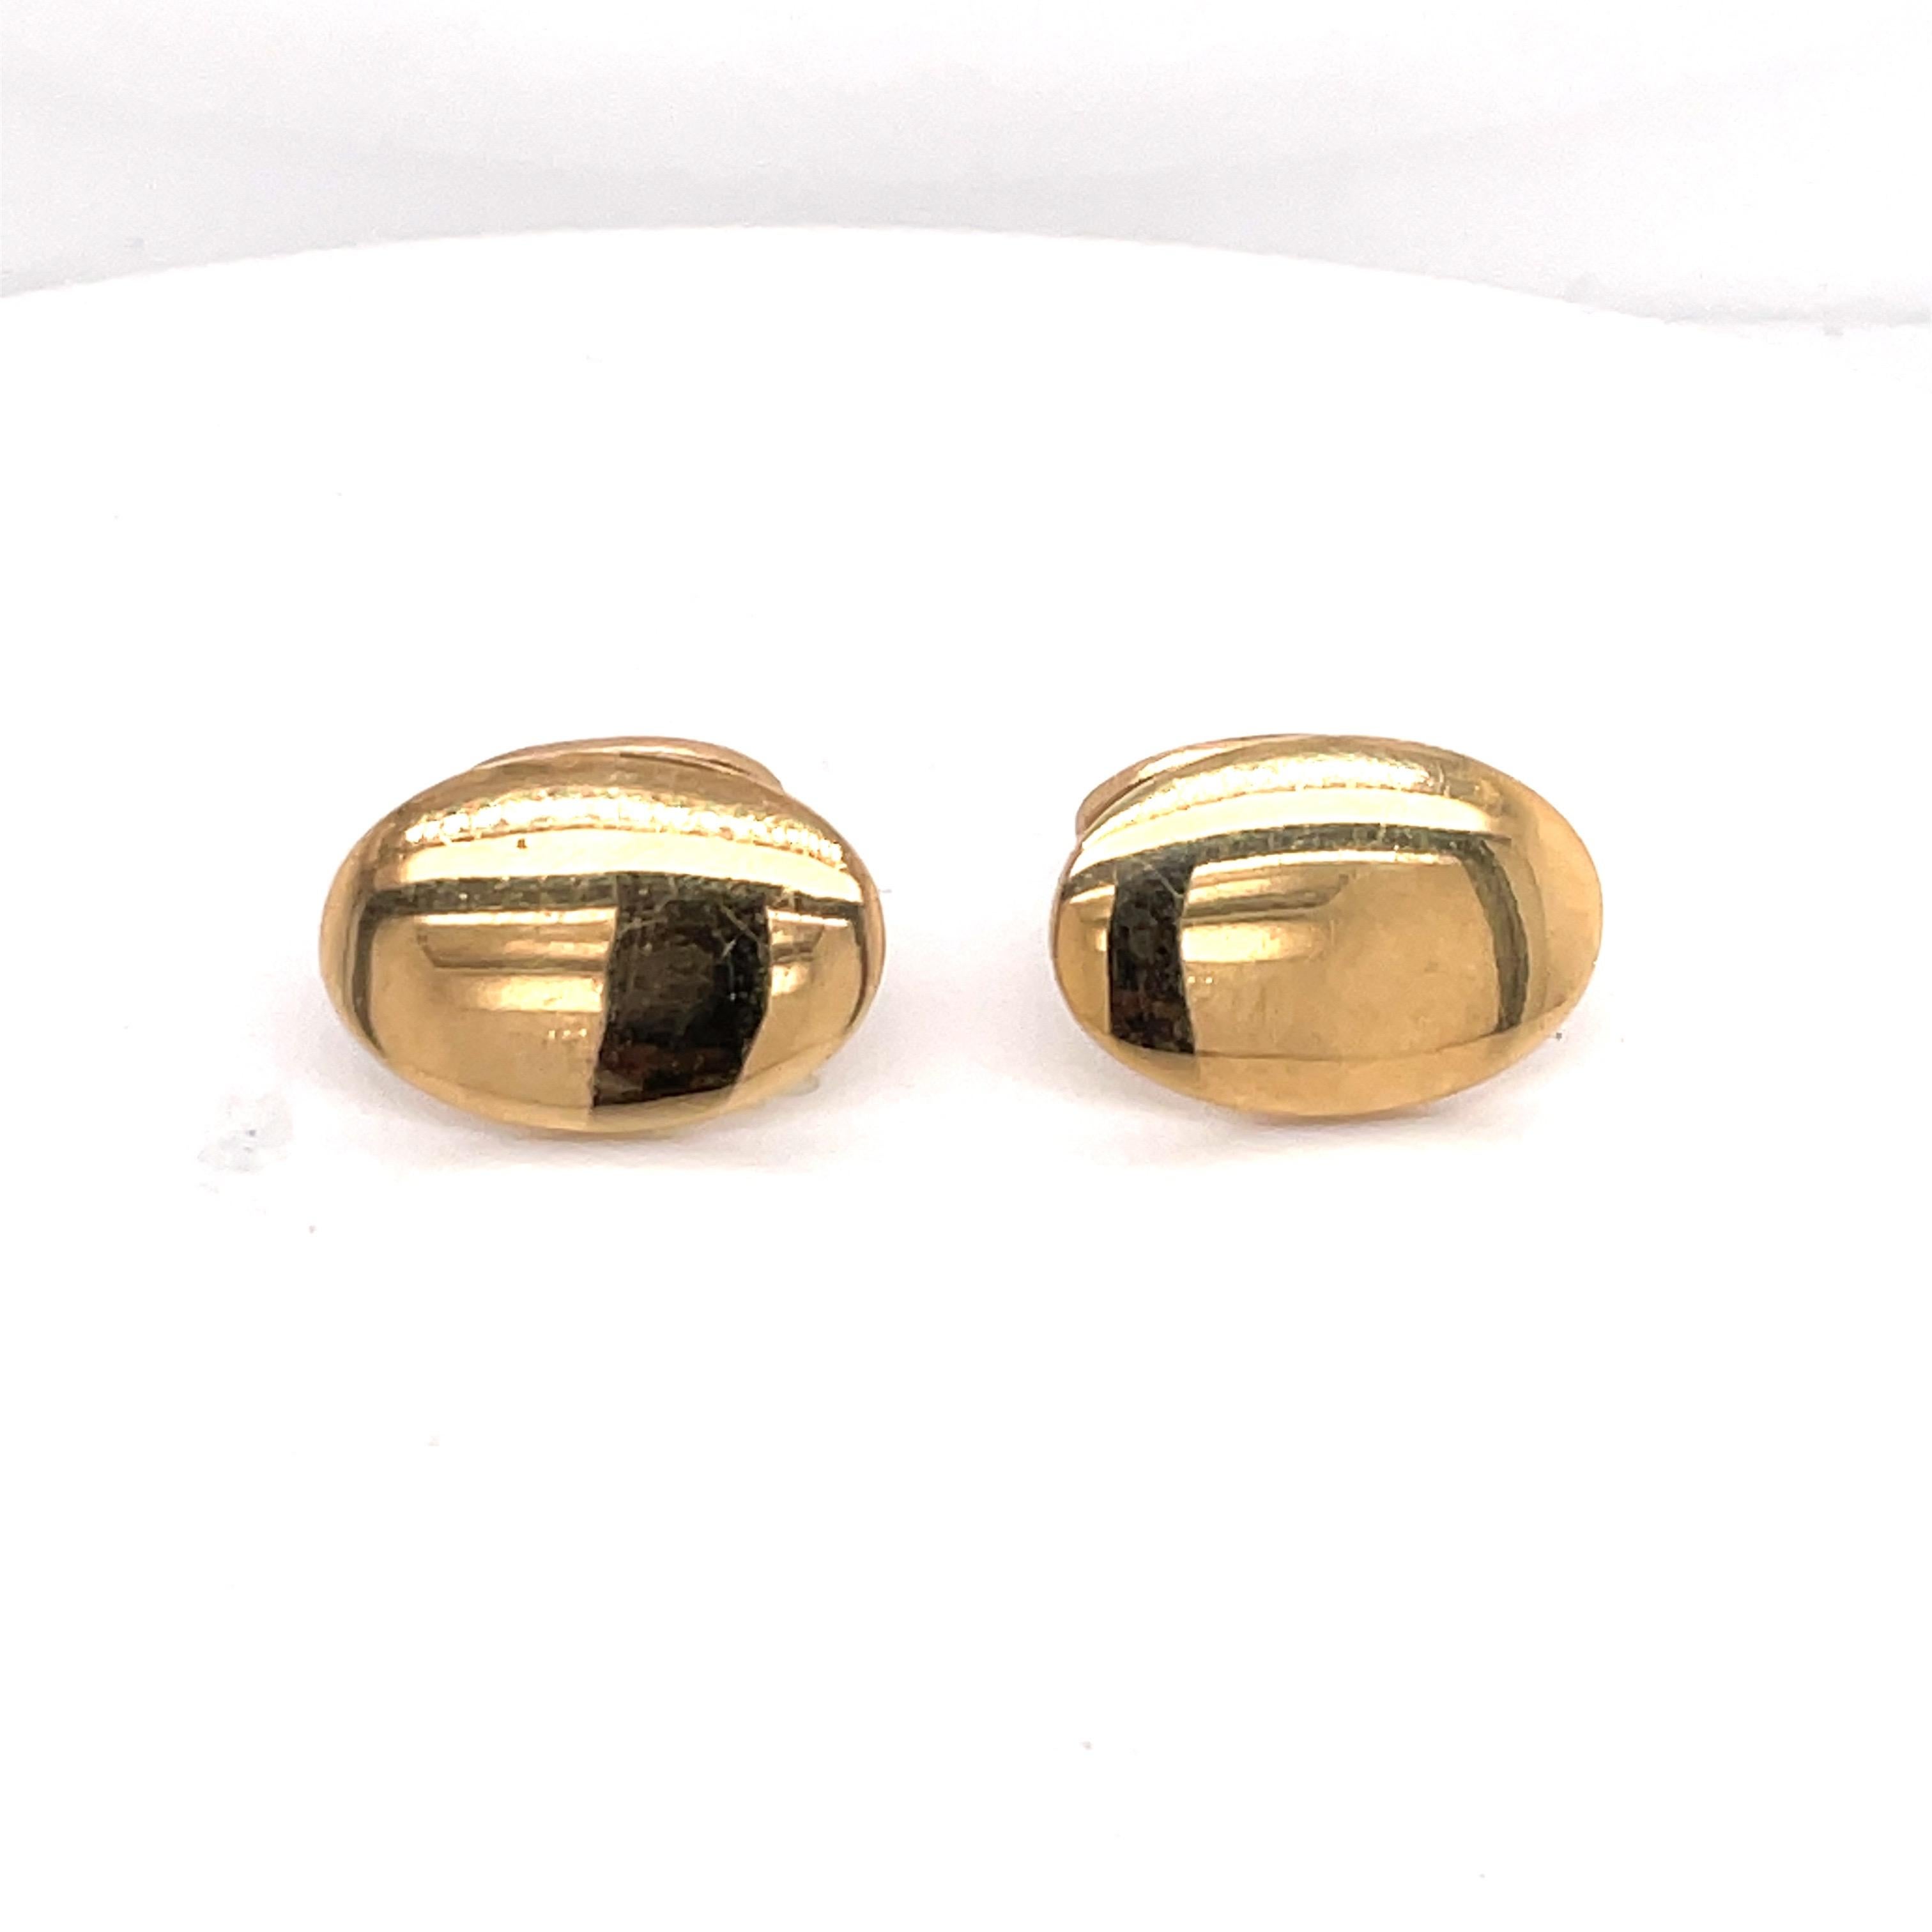 Tiffany & Co. 14 Karat Yellow Gold Cufflinks 9.9 Grams In Excellent Condition For Sale In New York, NY